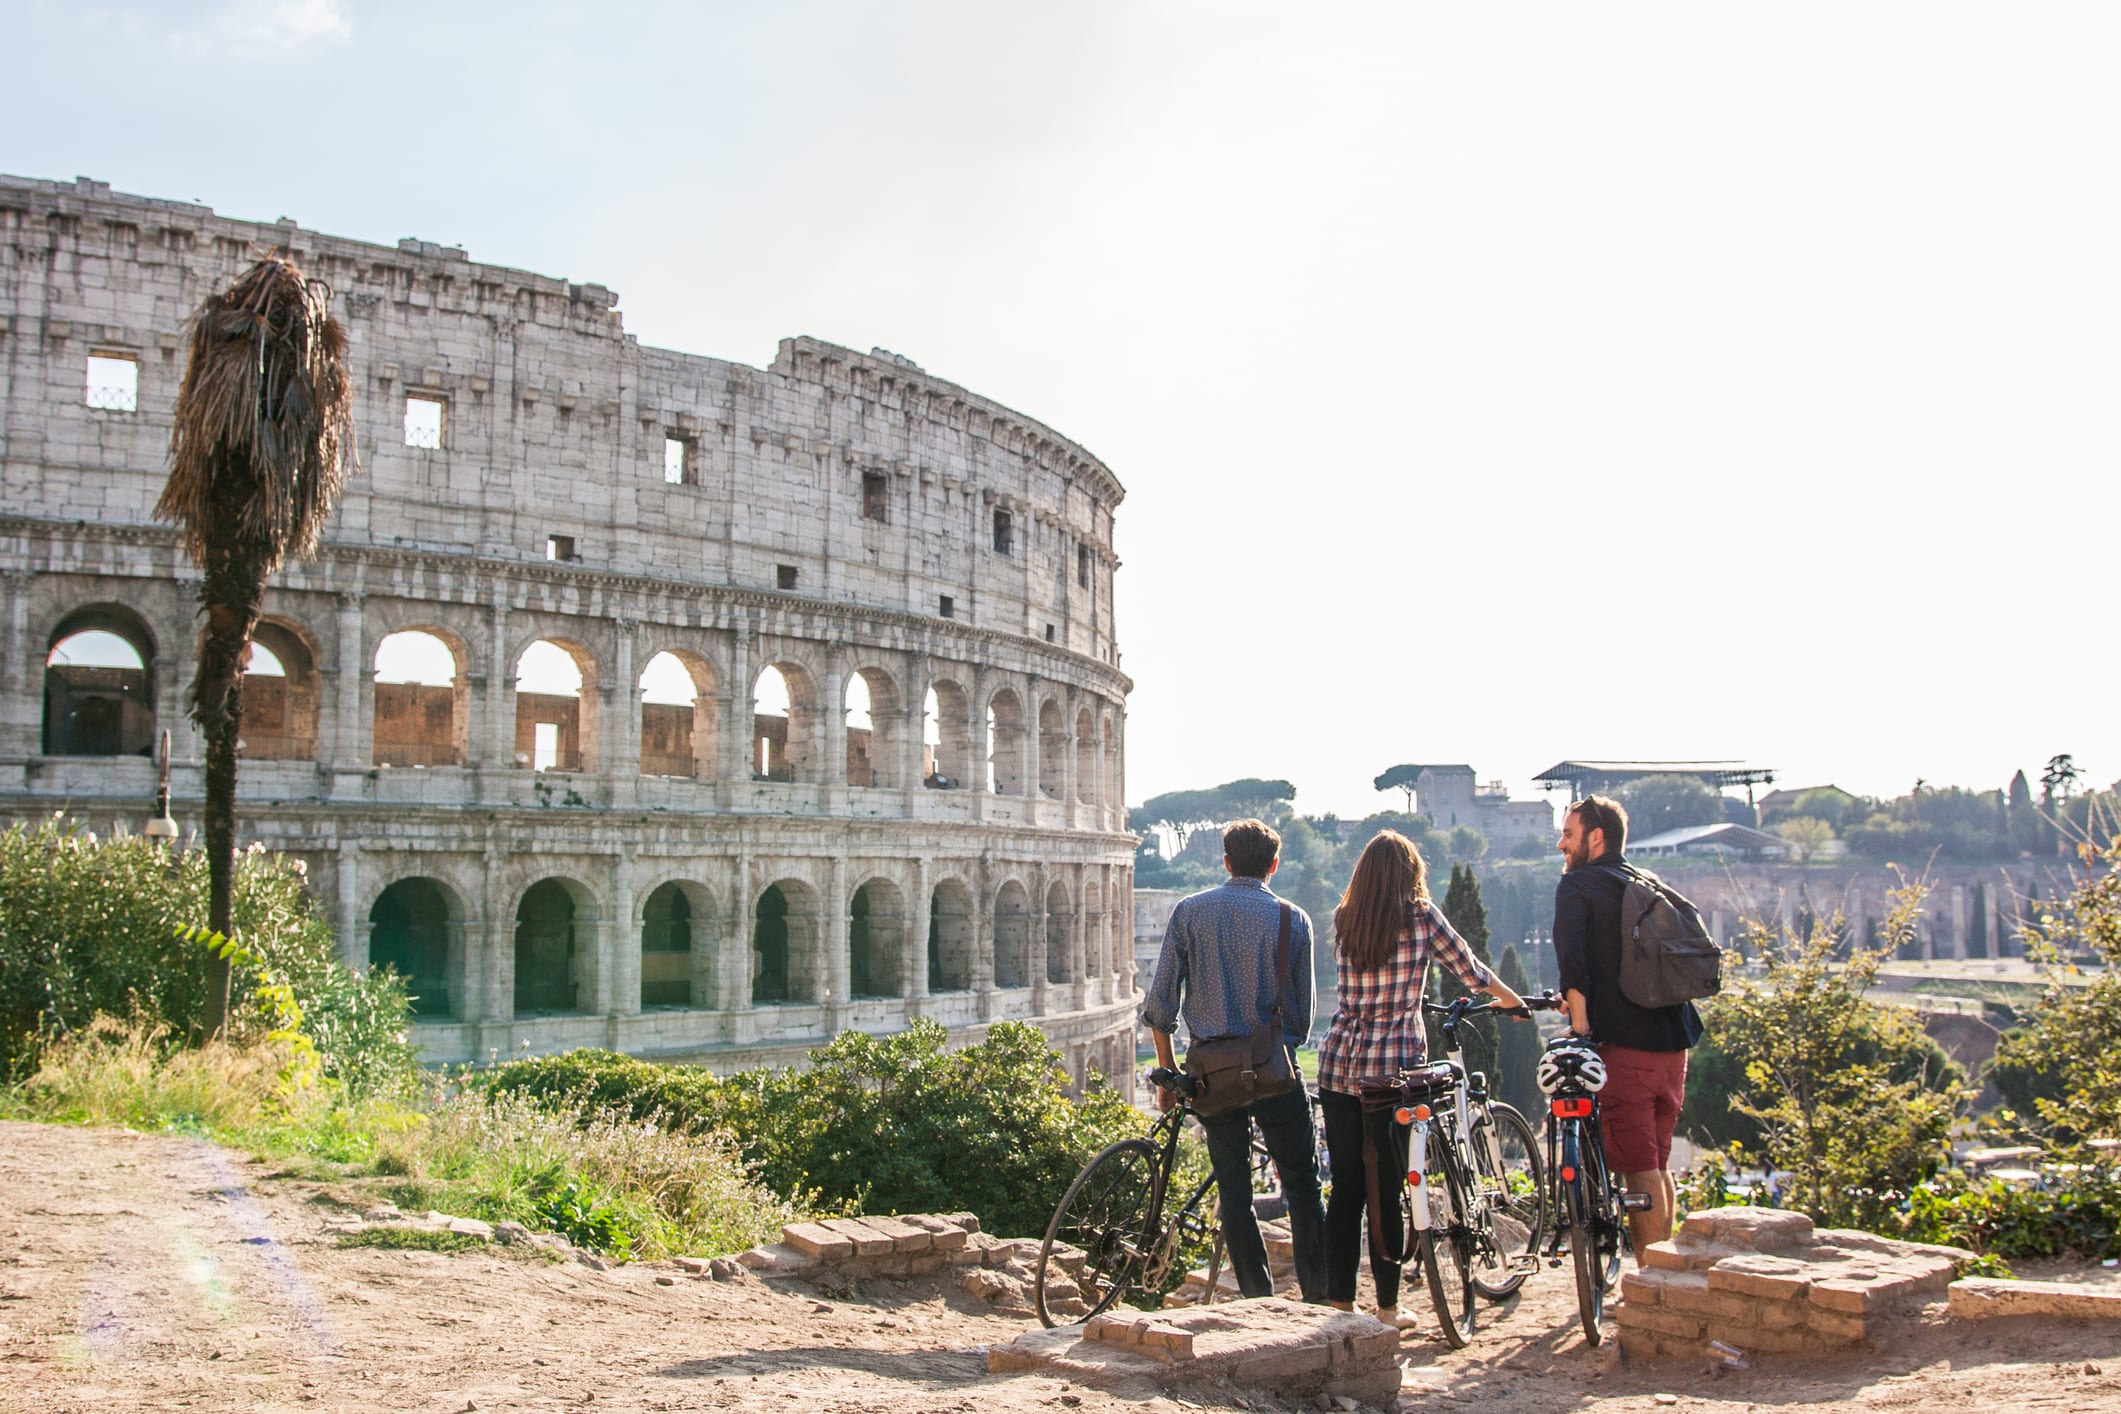 Three happy young friends tourists with bikes at Colosseum in Rome having fun